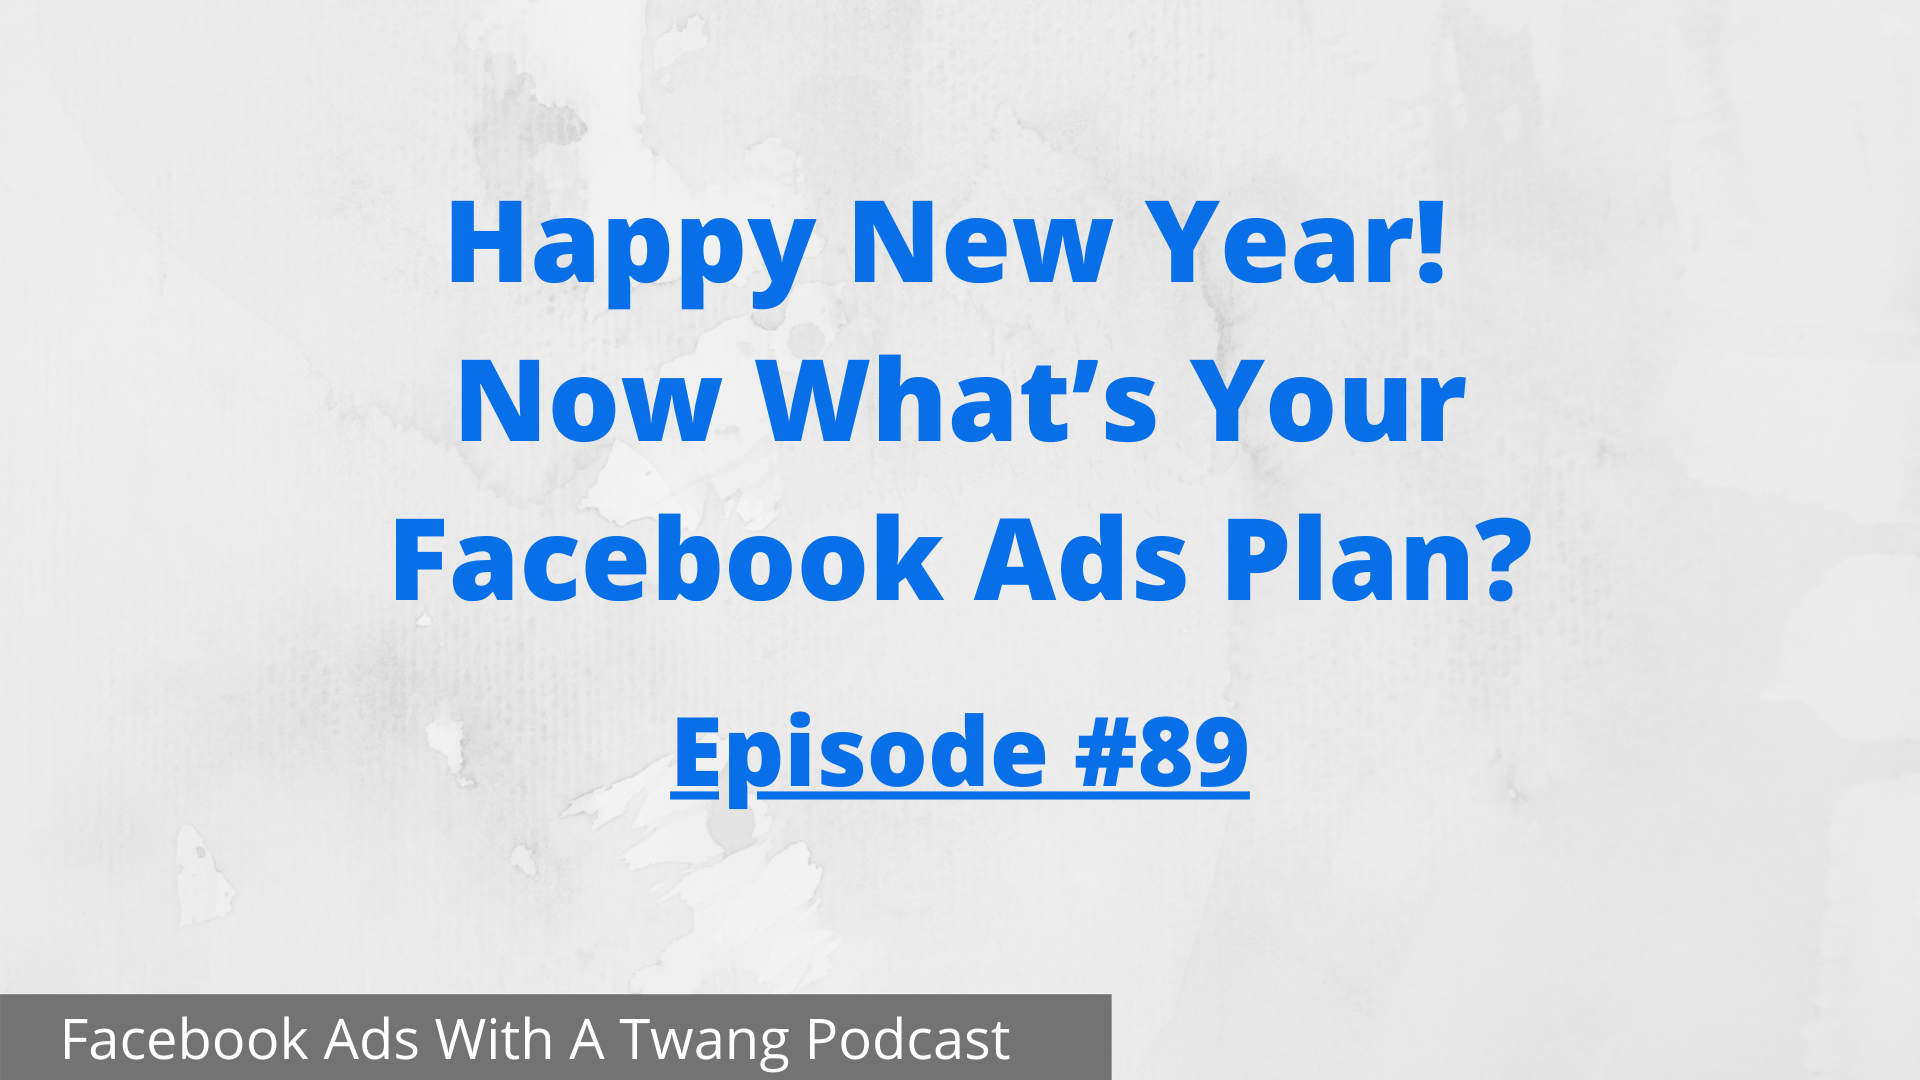 Ep 89 - Happy New Year! Now What’s Your Facebook Ads Plan?